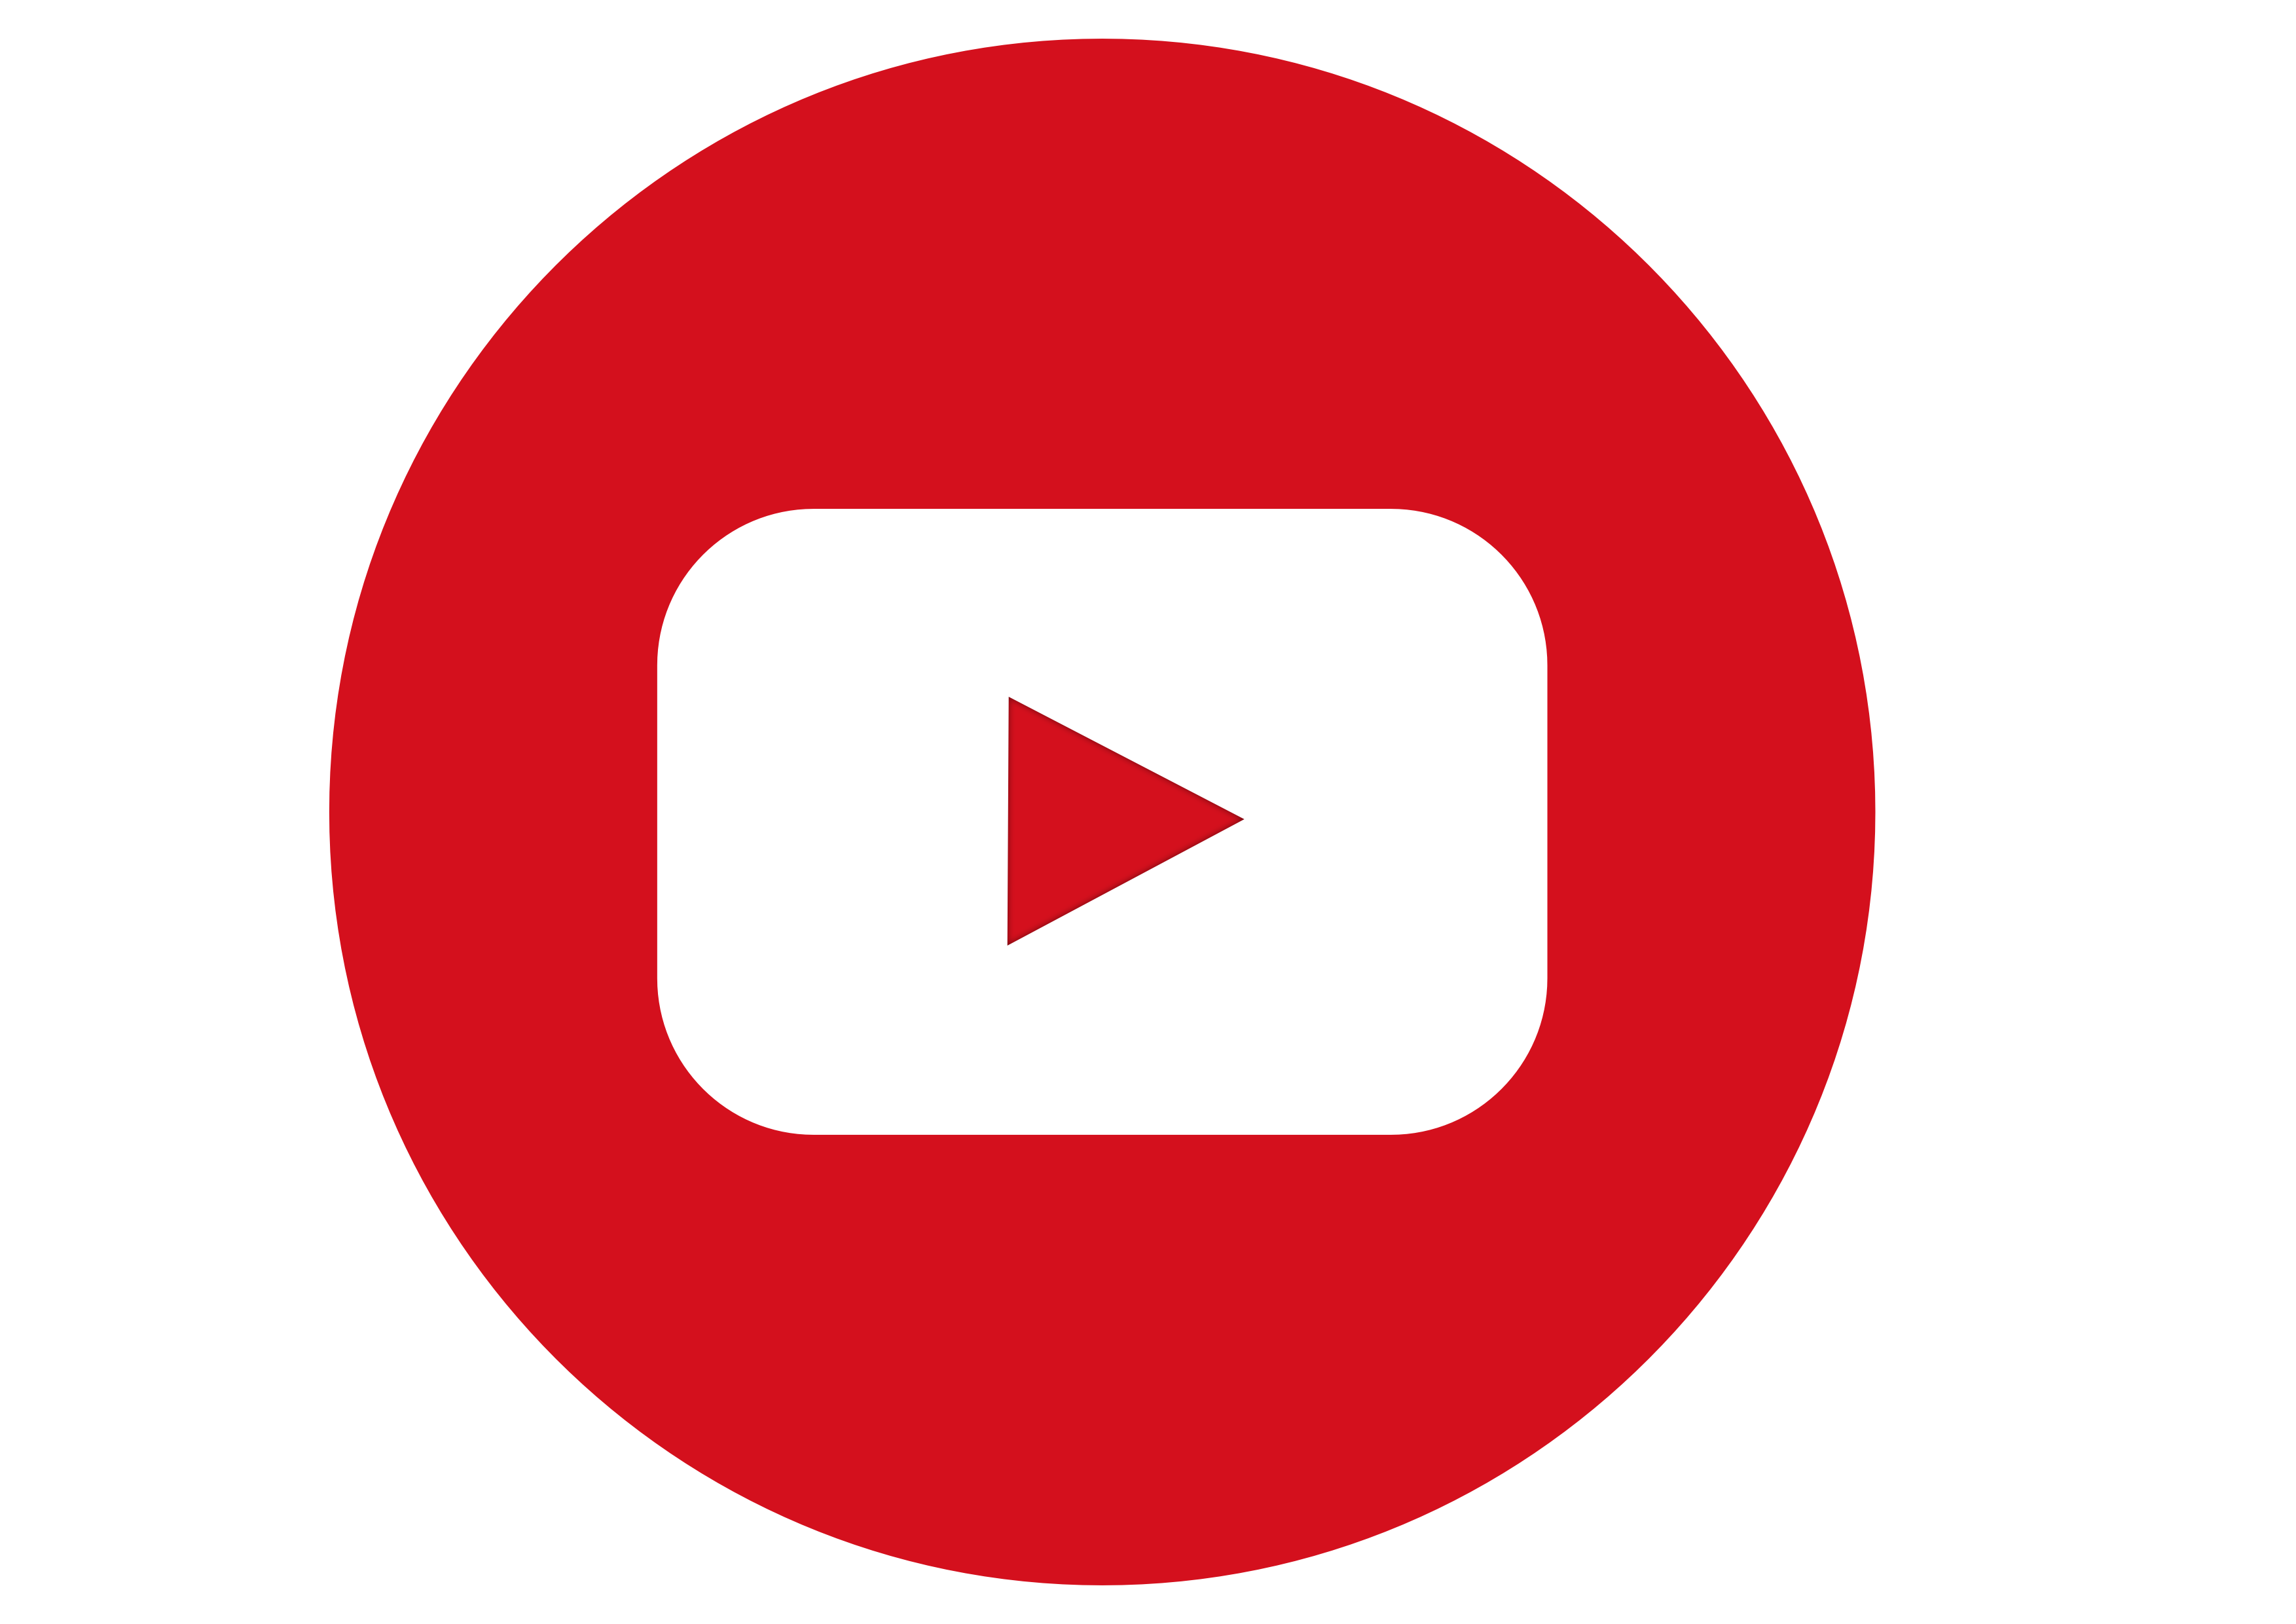 Youtube logo PNG transparent image download, size 3507x2480px